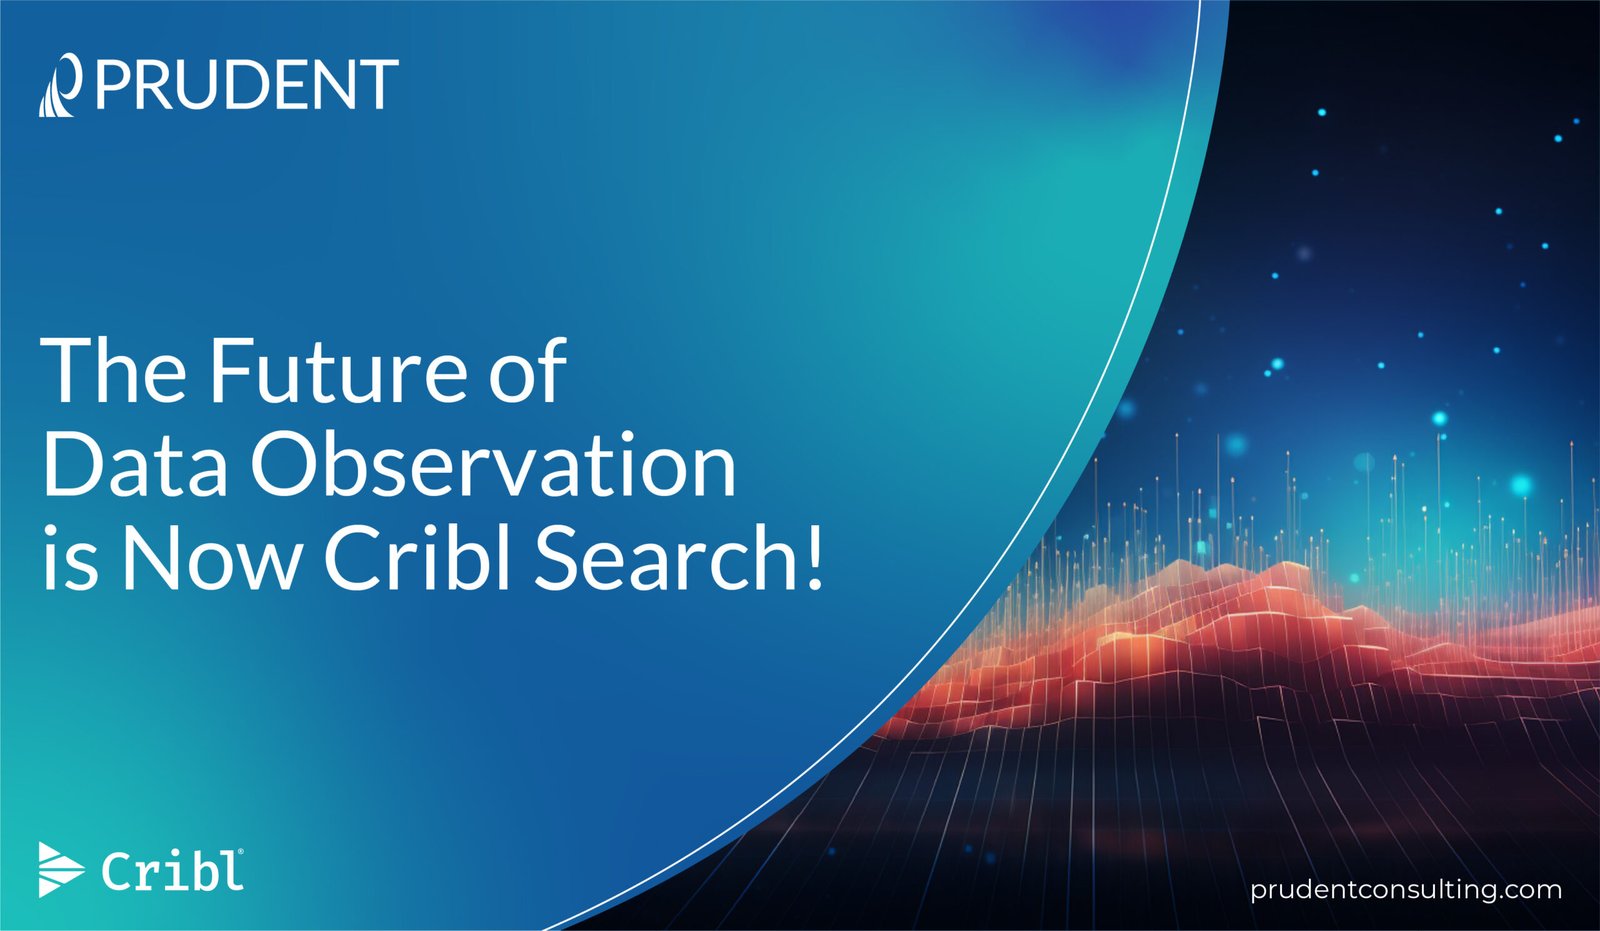 The Future of Data Observation is Now Cribl Search!